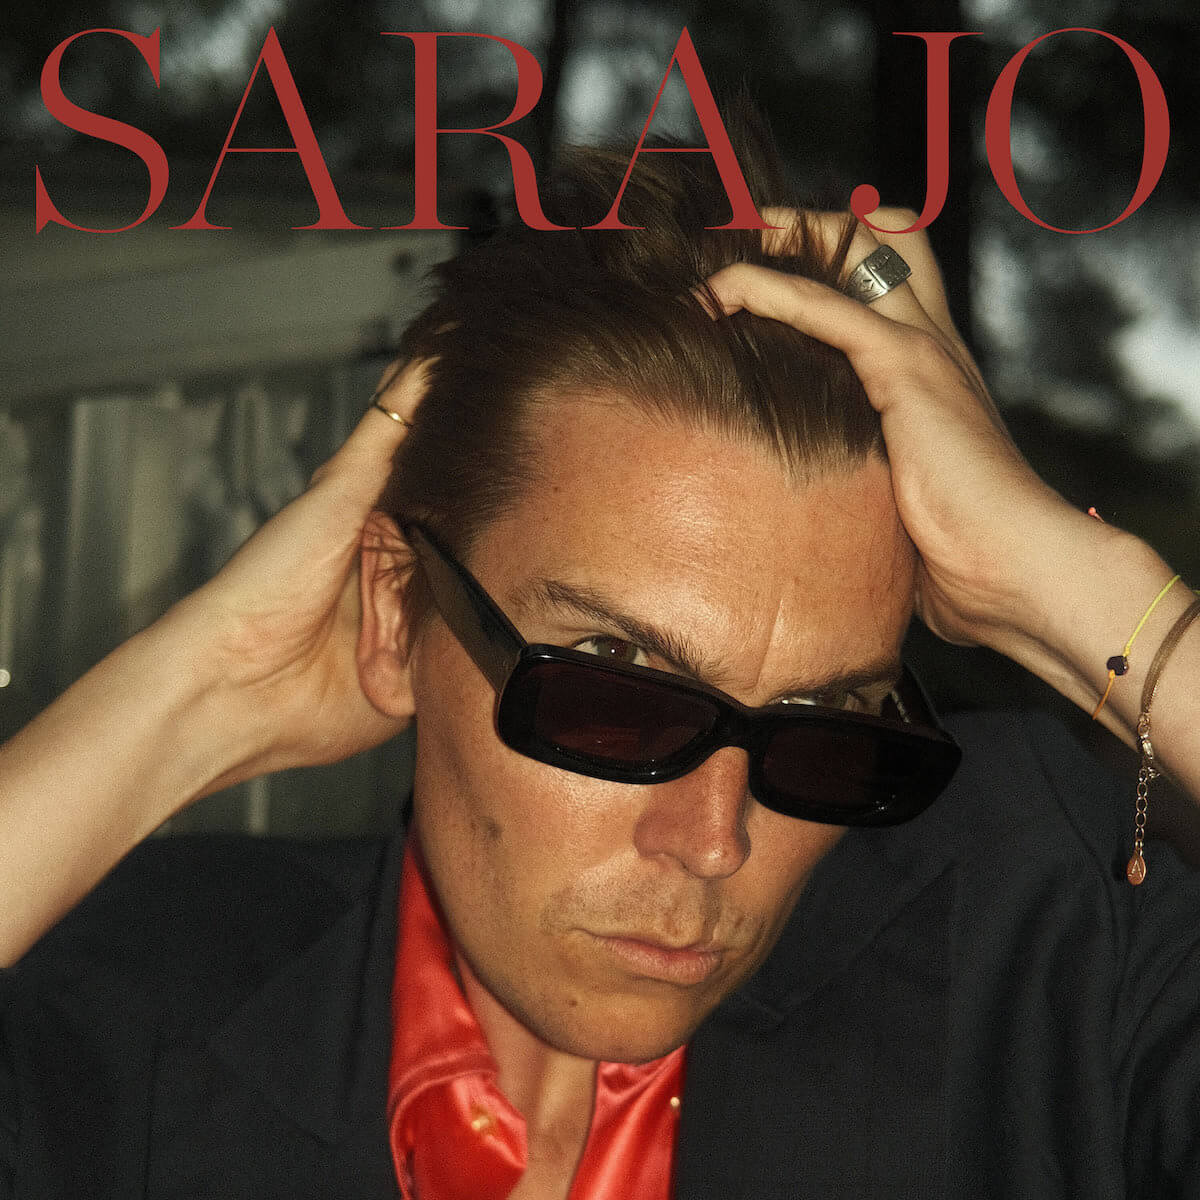 Alex Cameron has shared a new video for “Sara Jo.” The track was mixed by Mount Kimbie’s Kai Campos, and now out via Secretly Canadian